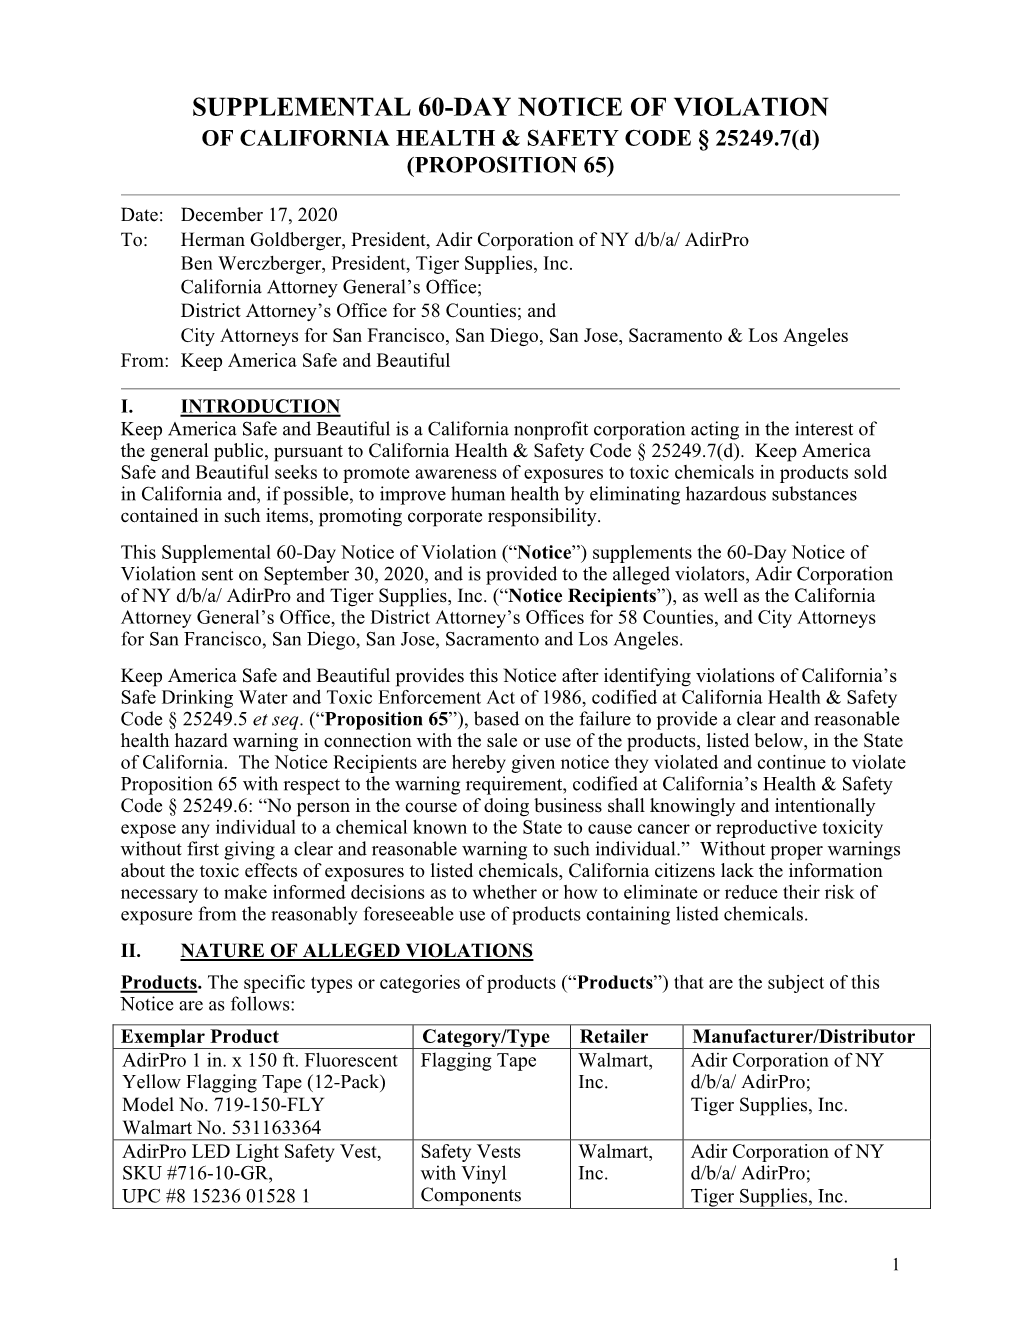 SUPPLEMENTAL 60-DAY NOTICE of VIOLATION of CALIFORNIA HEALTH & SAFETY CODE § 25249.7(D) (PROPOSITION 65)